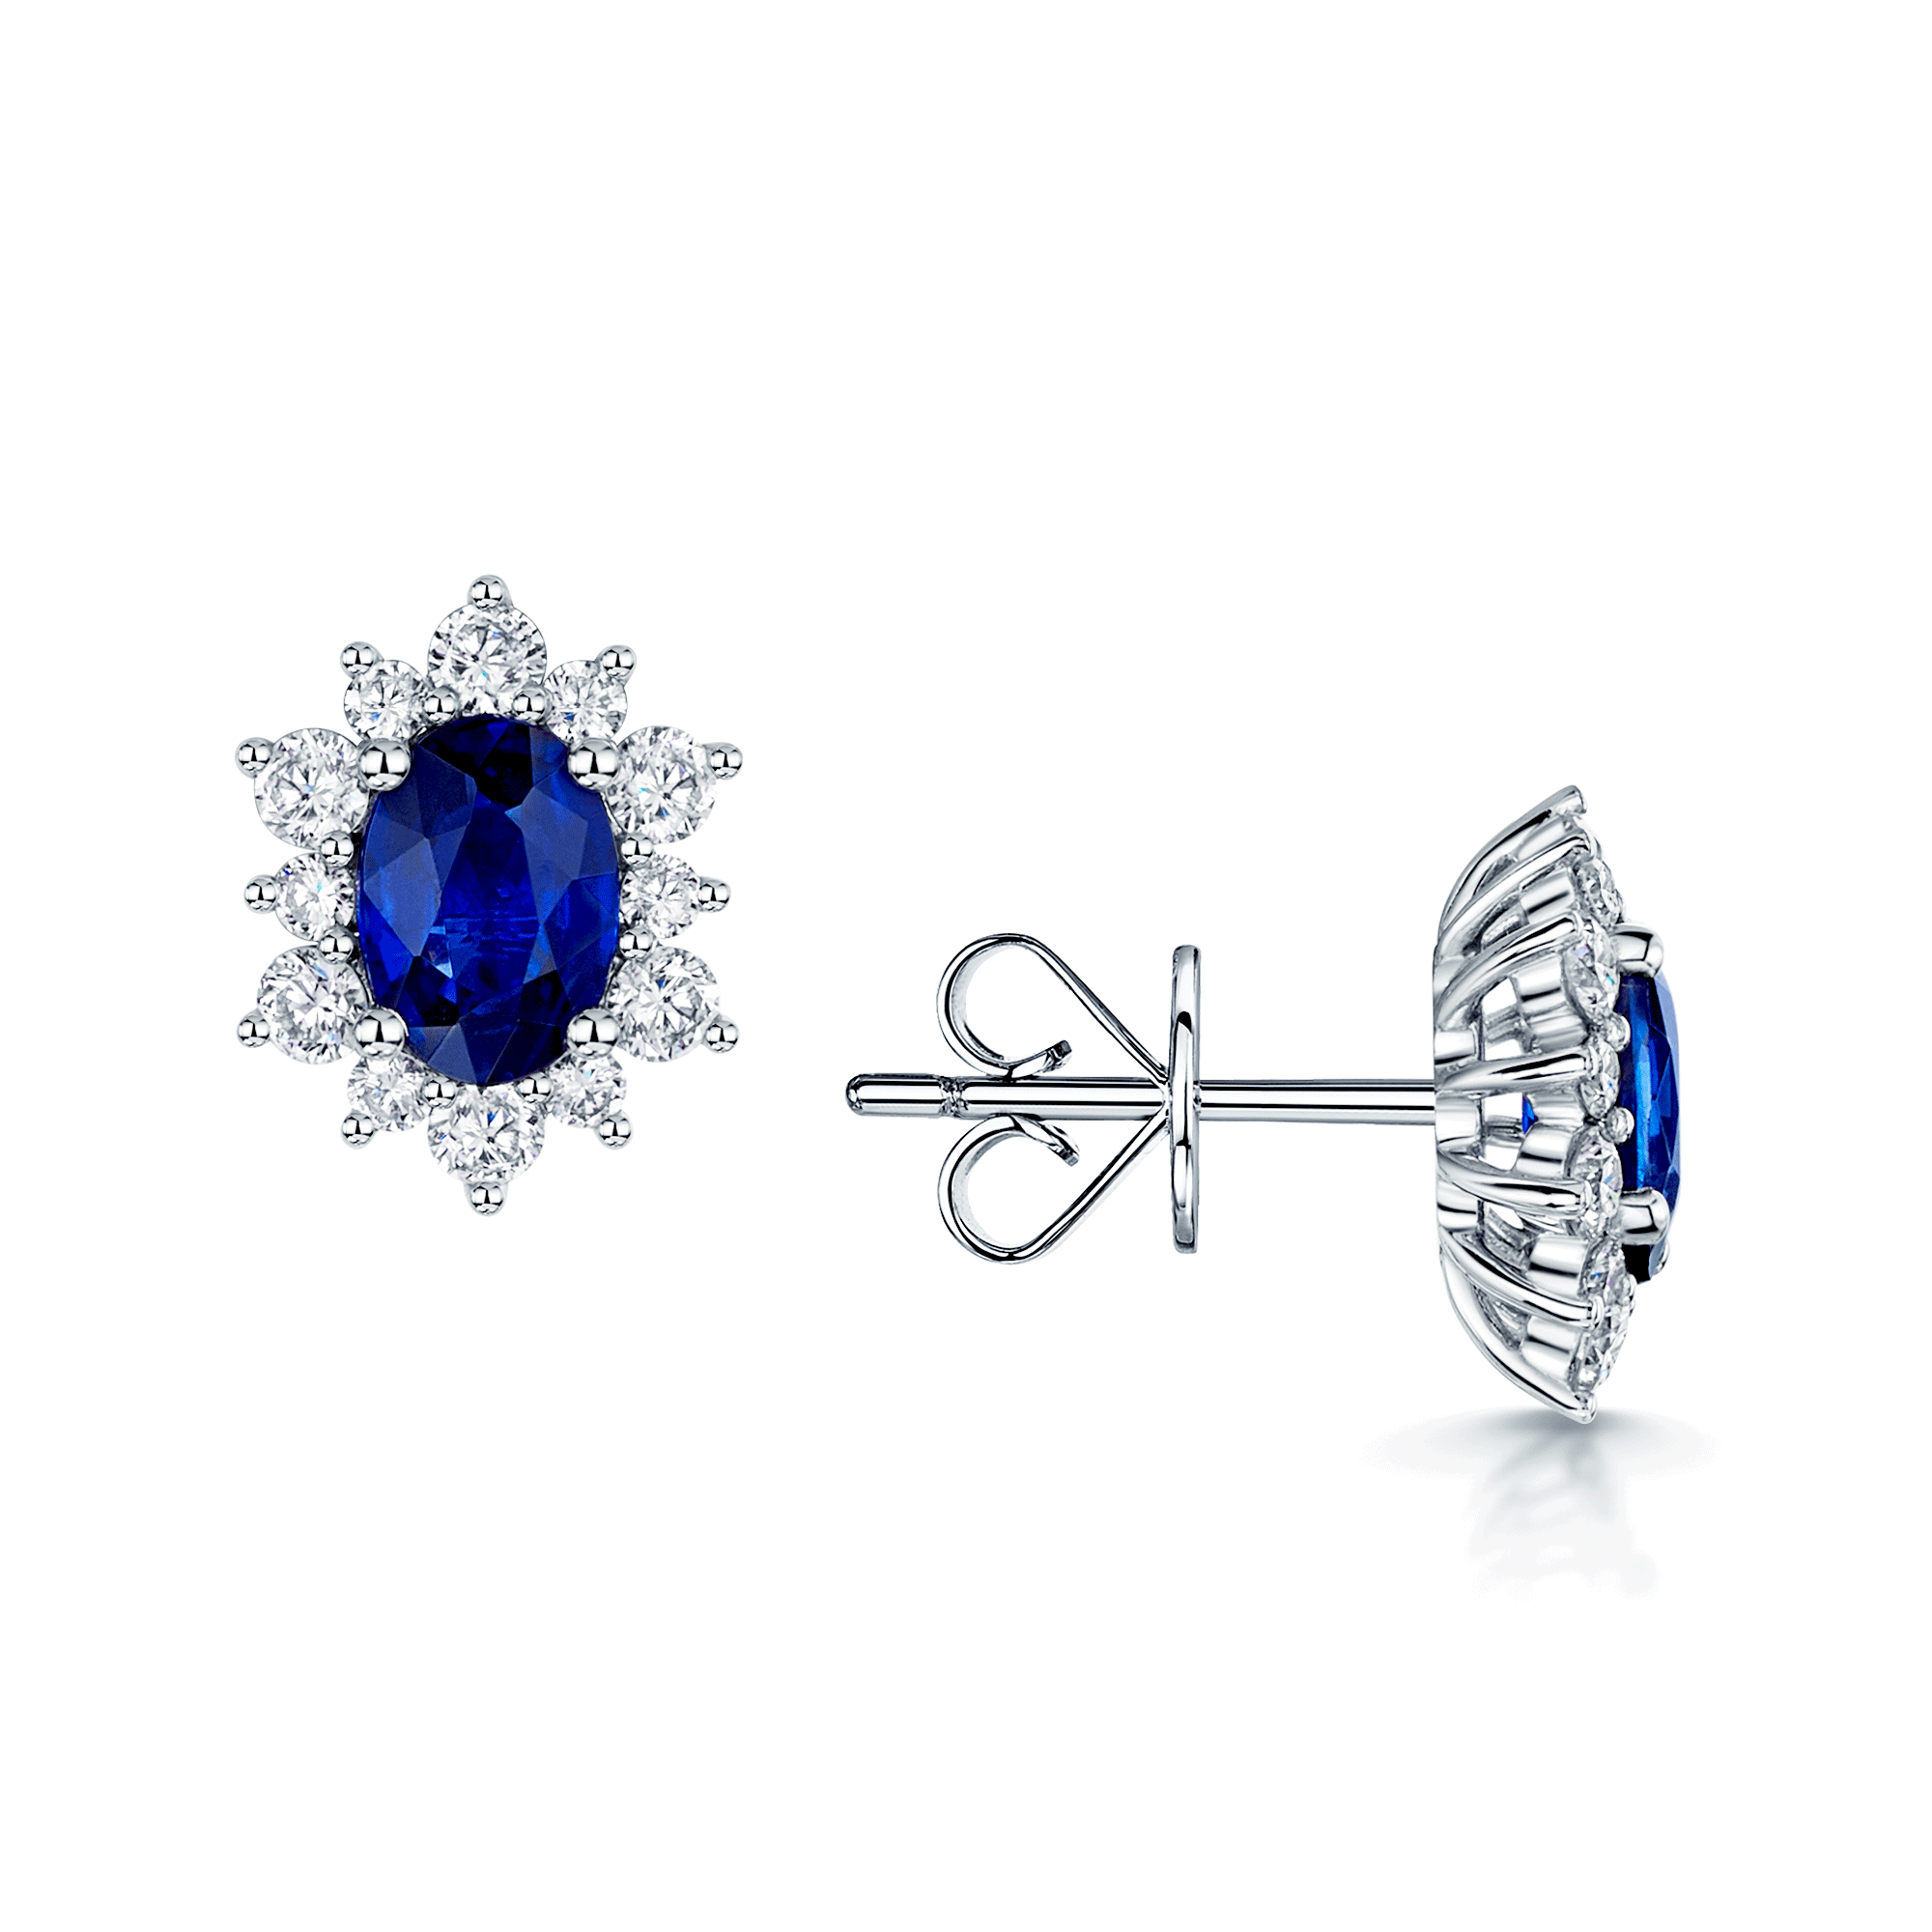 18ct White Gold Oval Blue Sapphire And Round Brilliant Cut Diamond Stud Earrings.